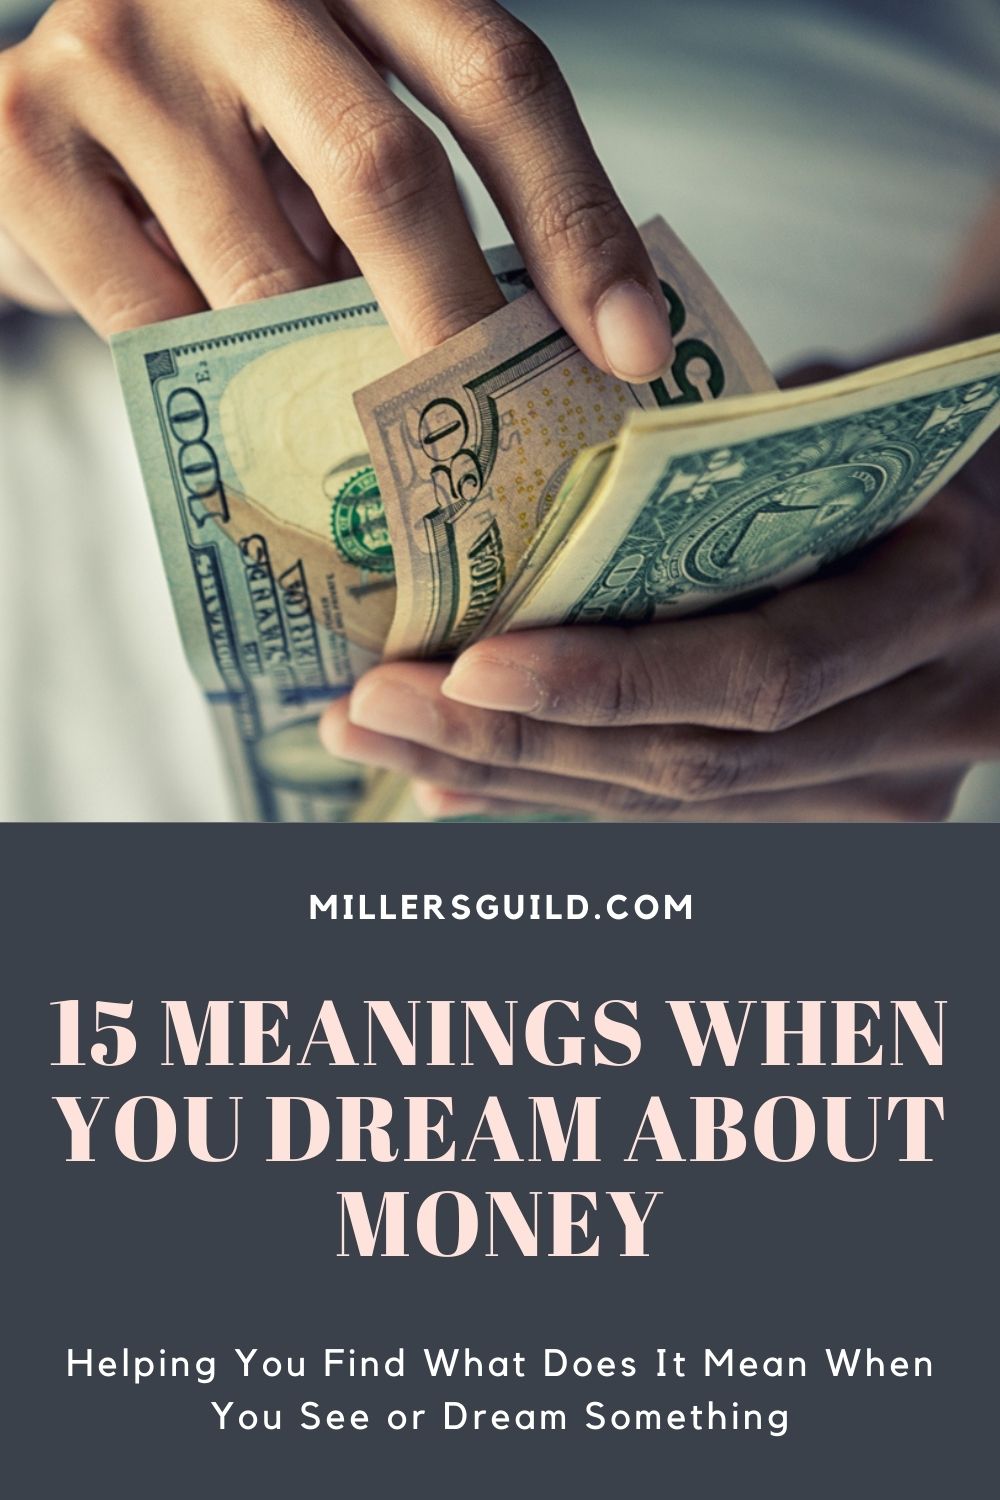 Dreams About Finding Money – Spiritual Meaning